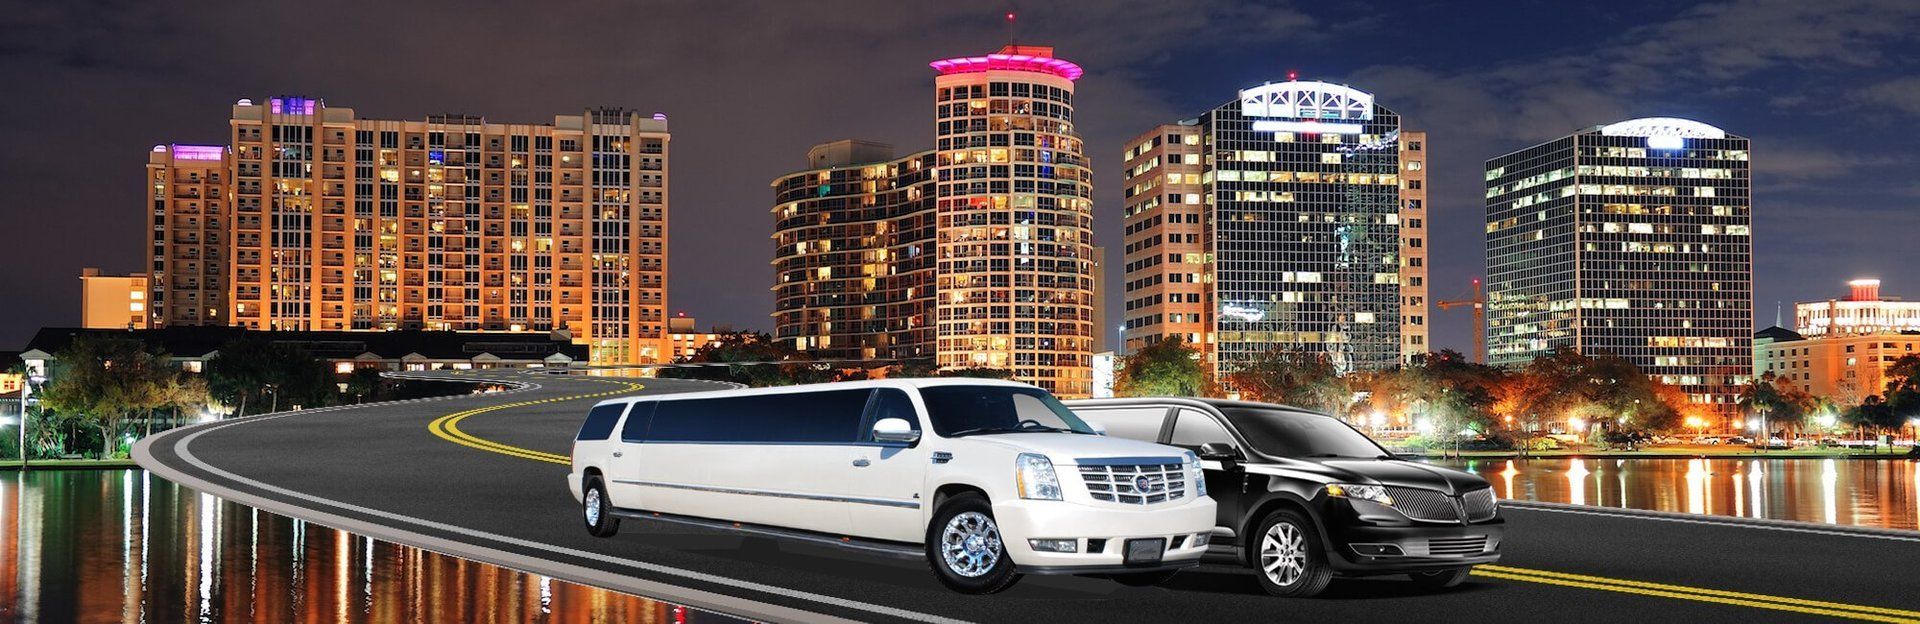 Best Limo Service in Orlando